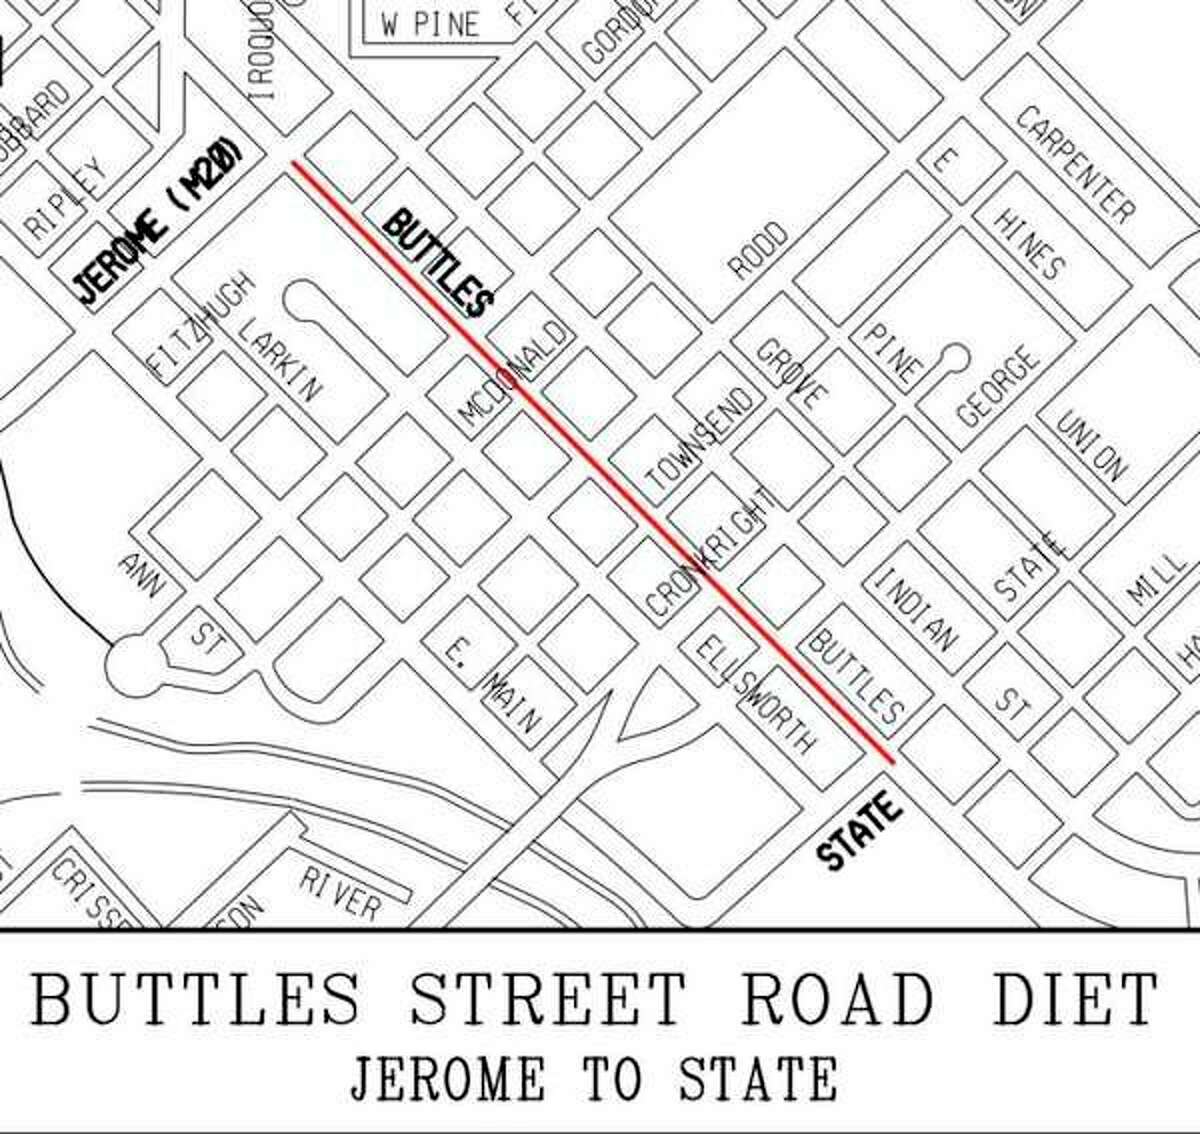 Buttles Street will undergo a lane reduction on a trial basis from Jerome to State streets.